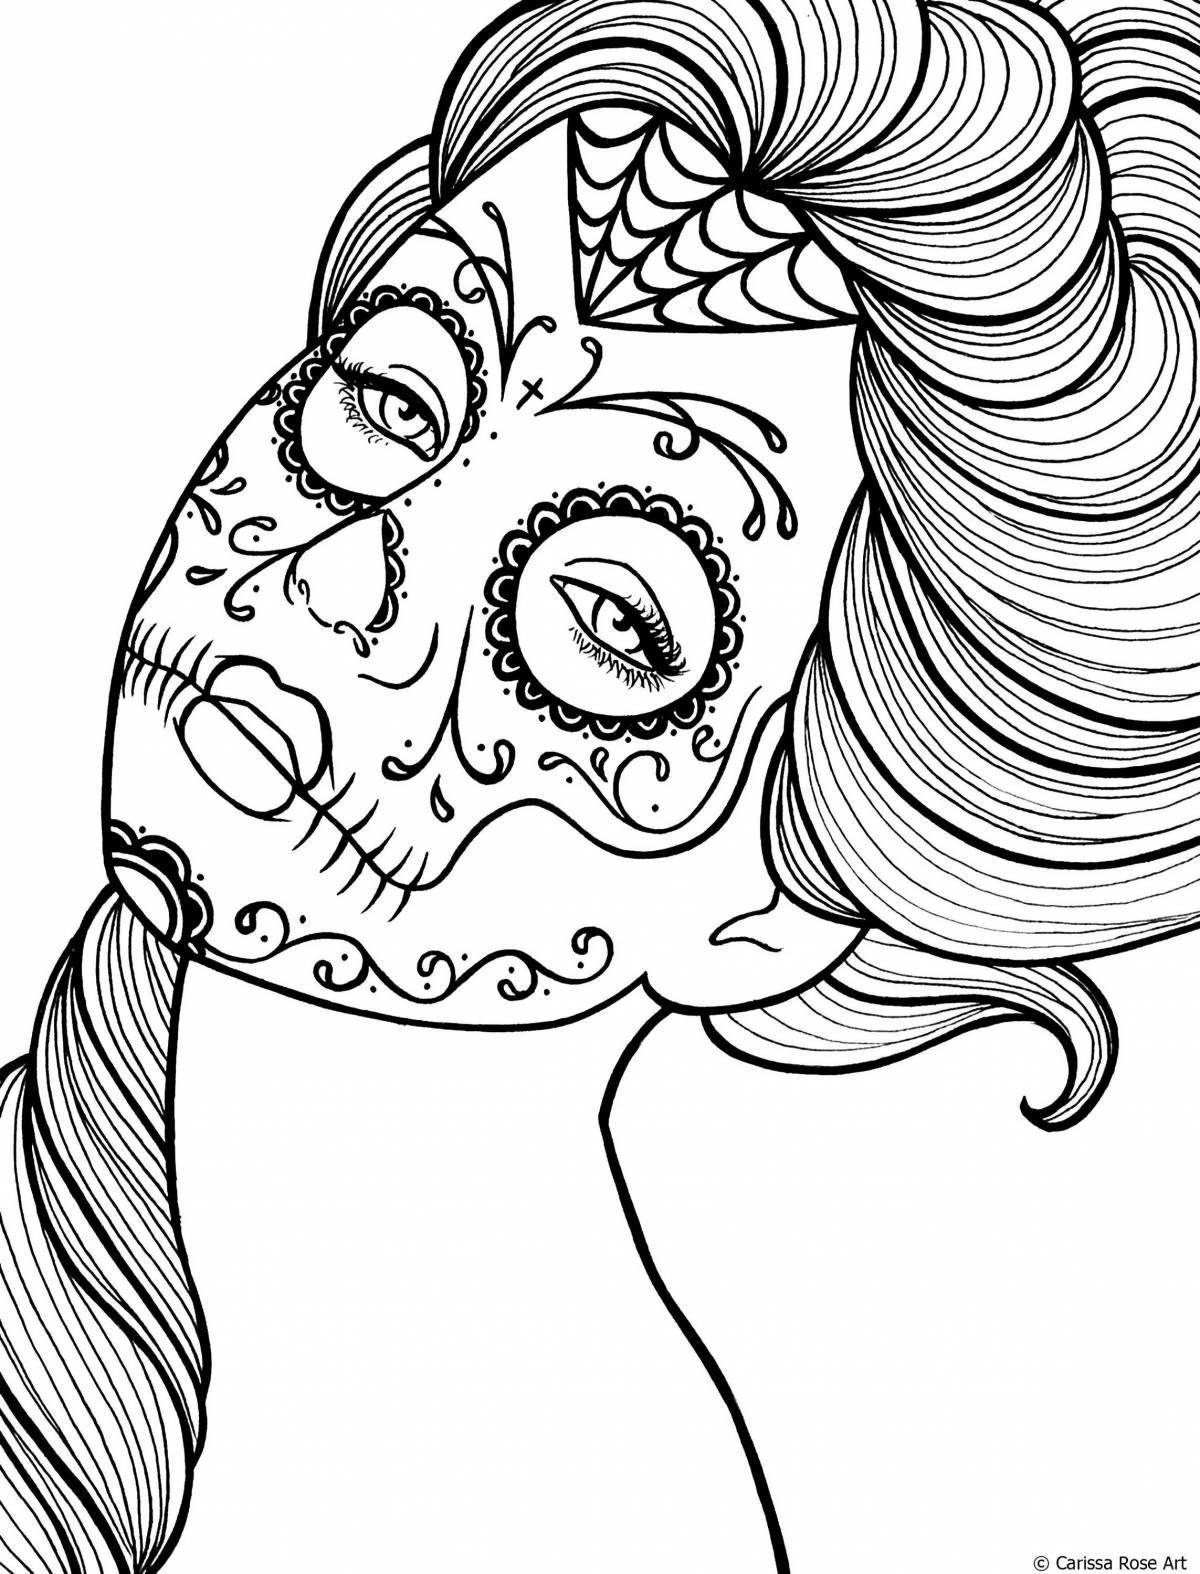 Cheerful face coloring page